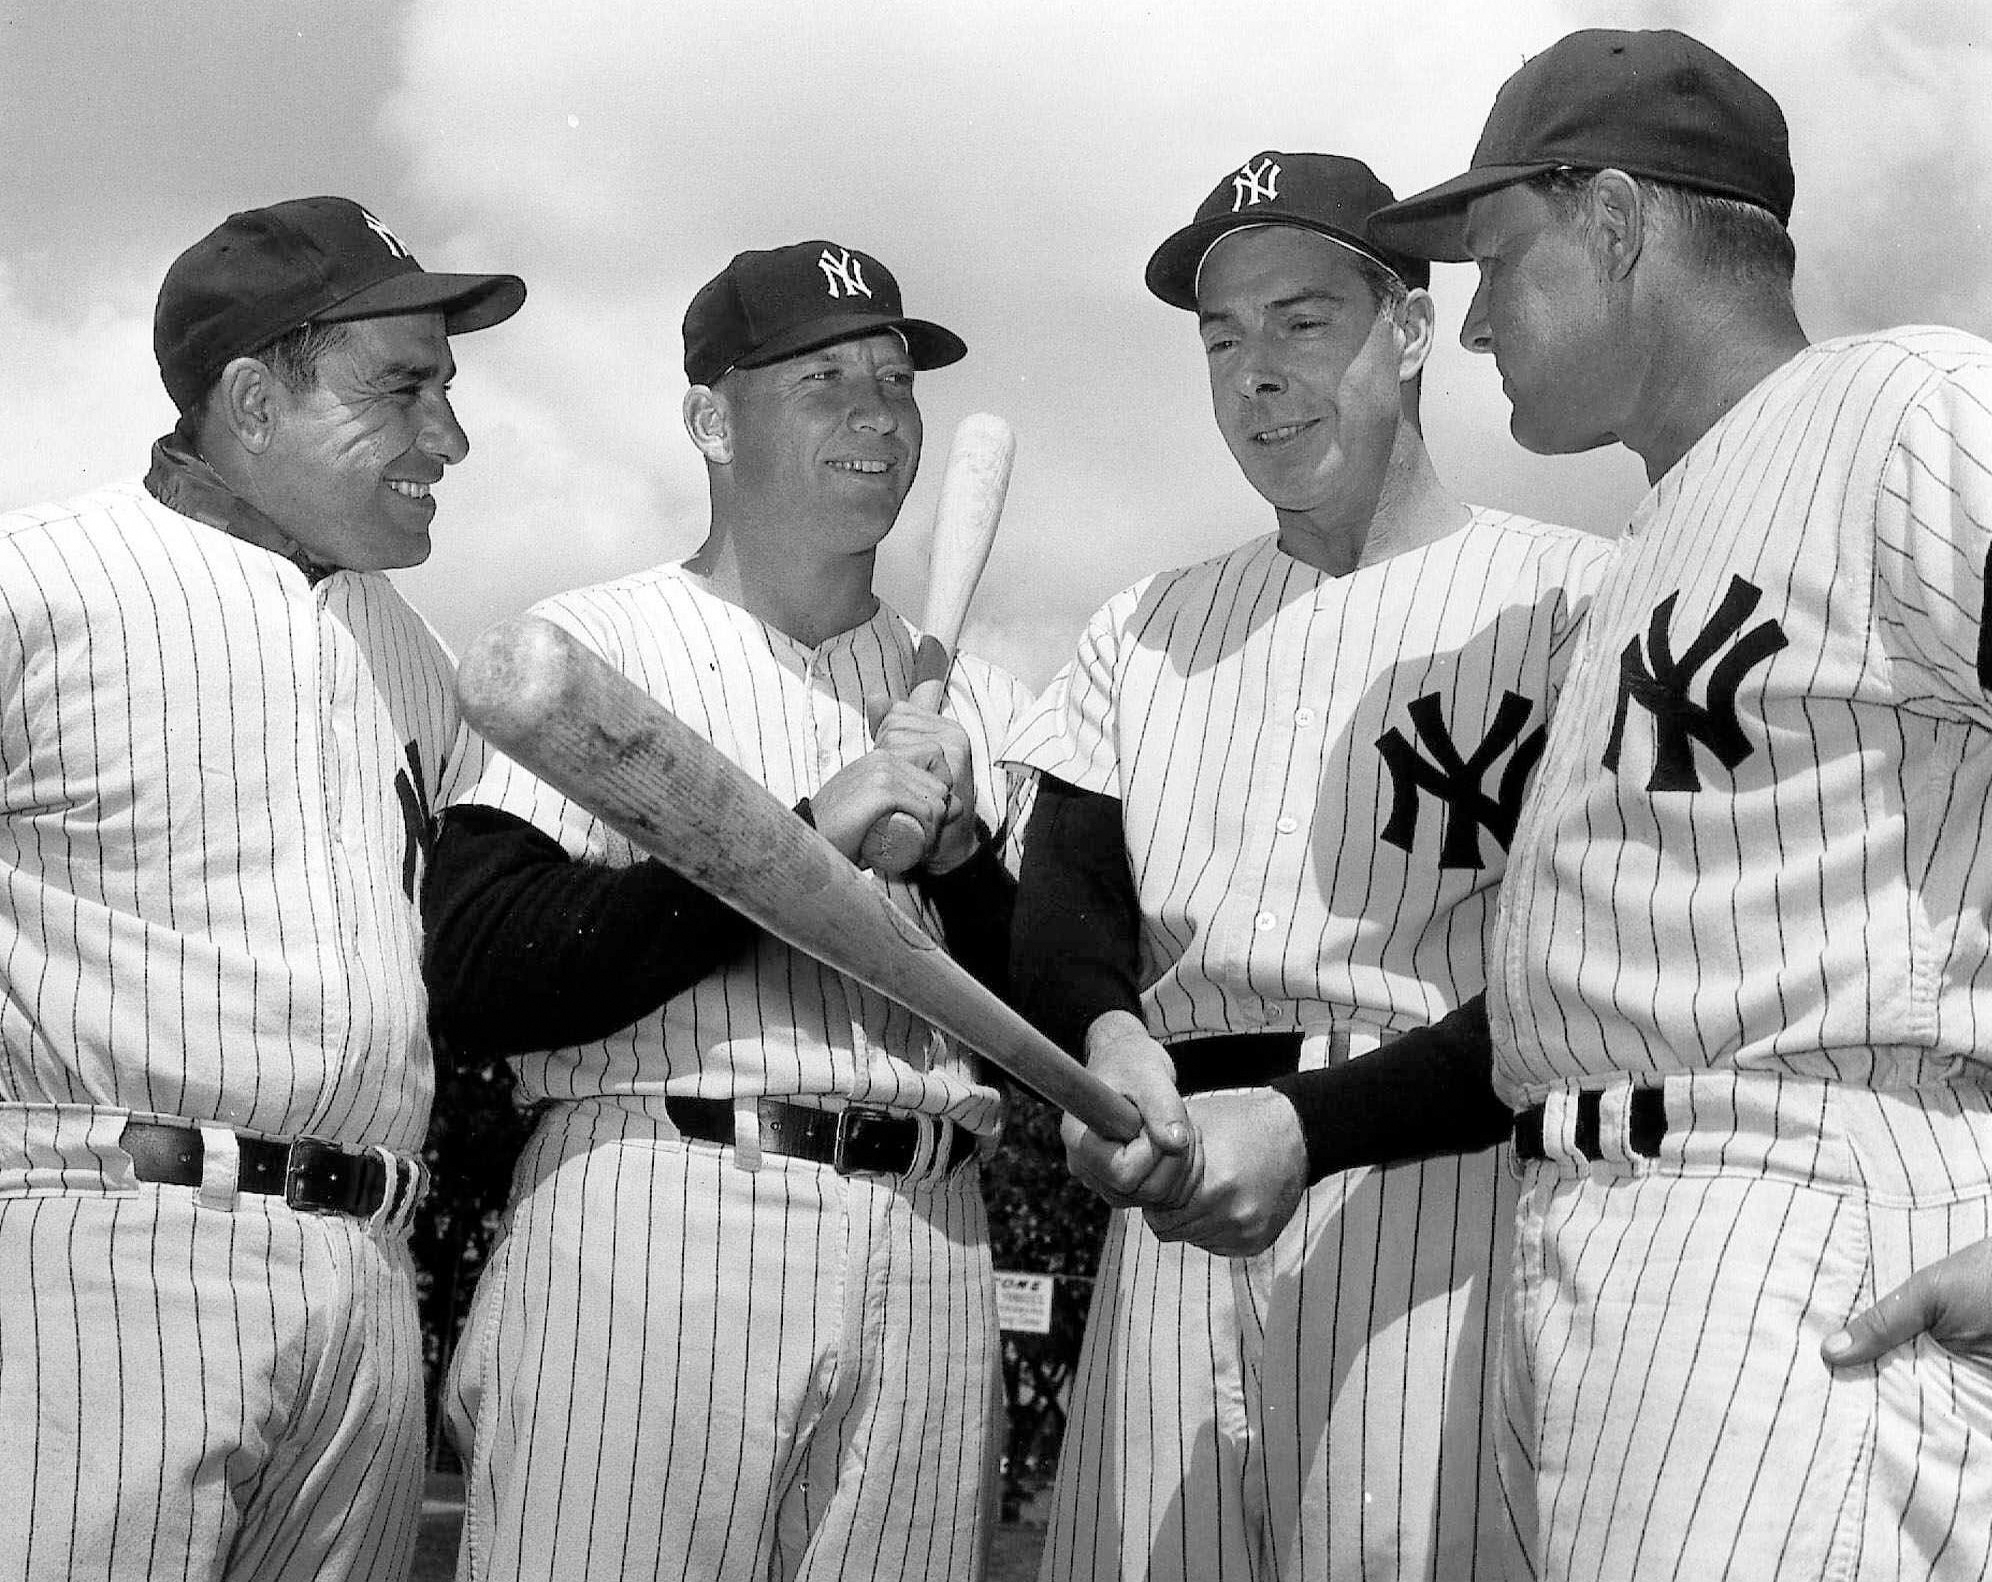 10 greatest Yankees players of all time, ranked